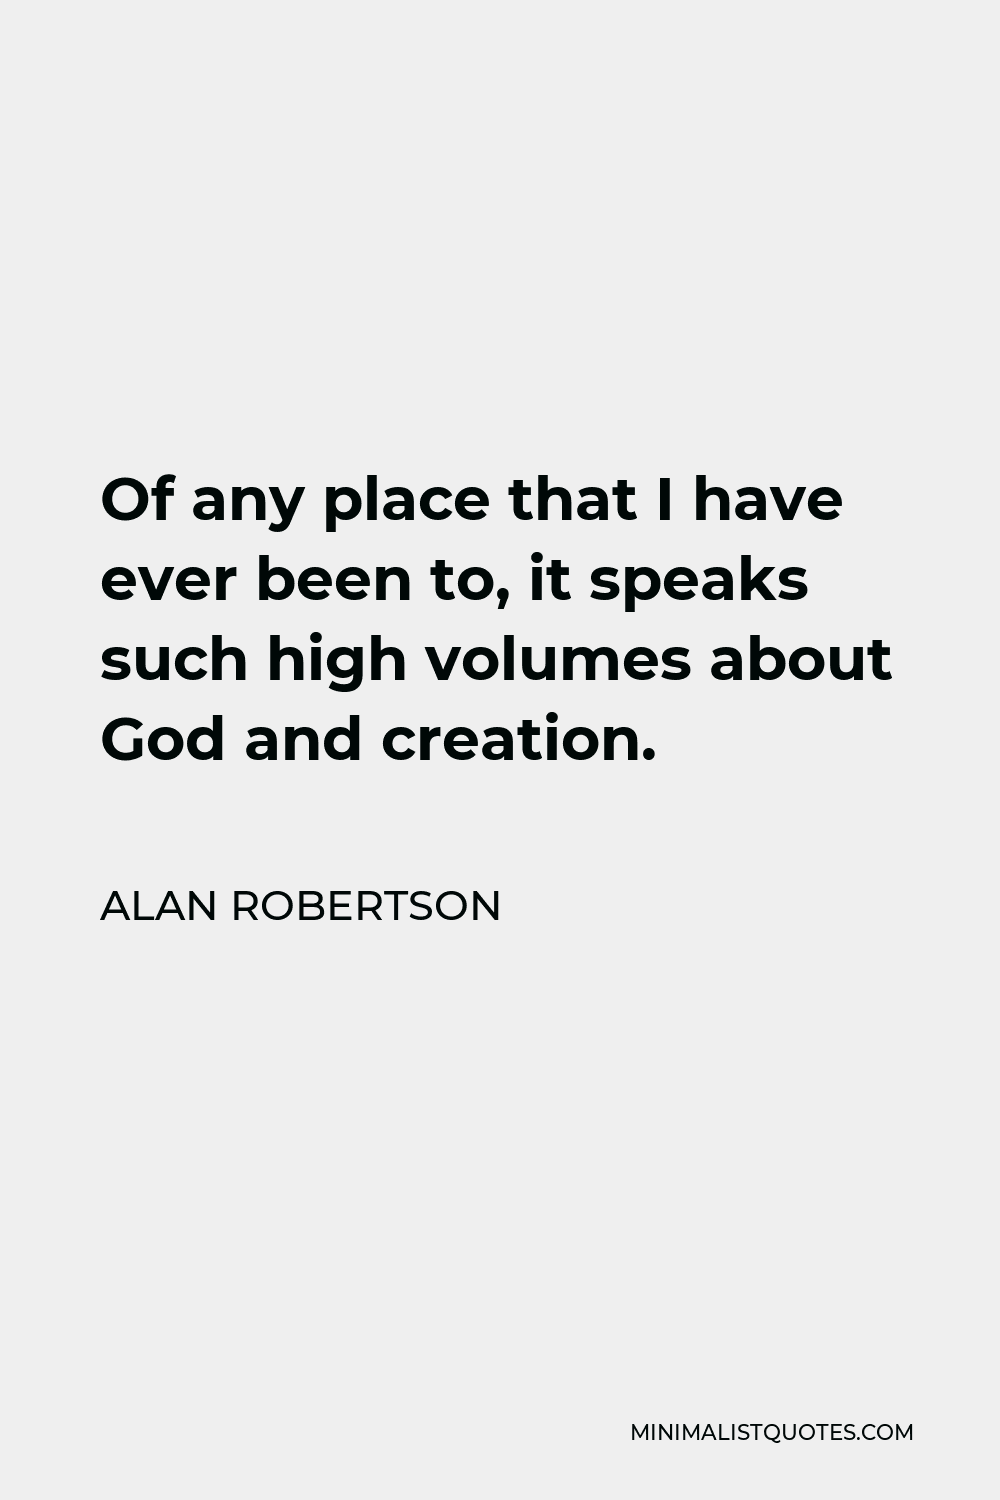 Alan Robertson Quote - Of any place that I have ever been to, it speaks such high volumes about God and creation.